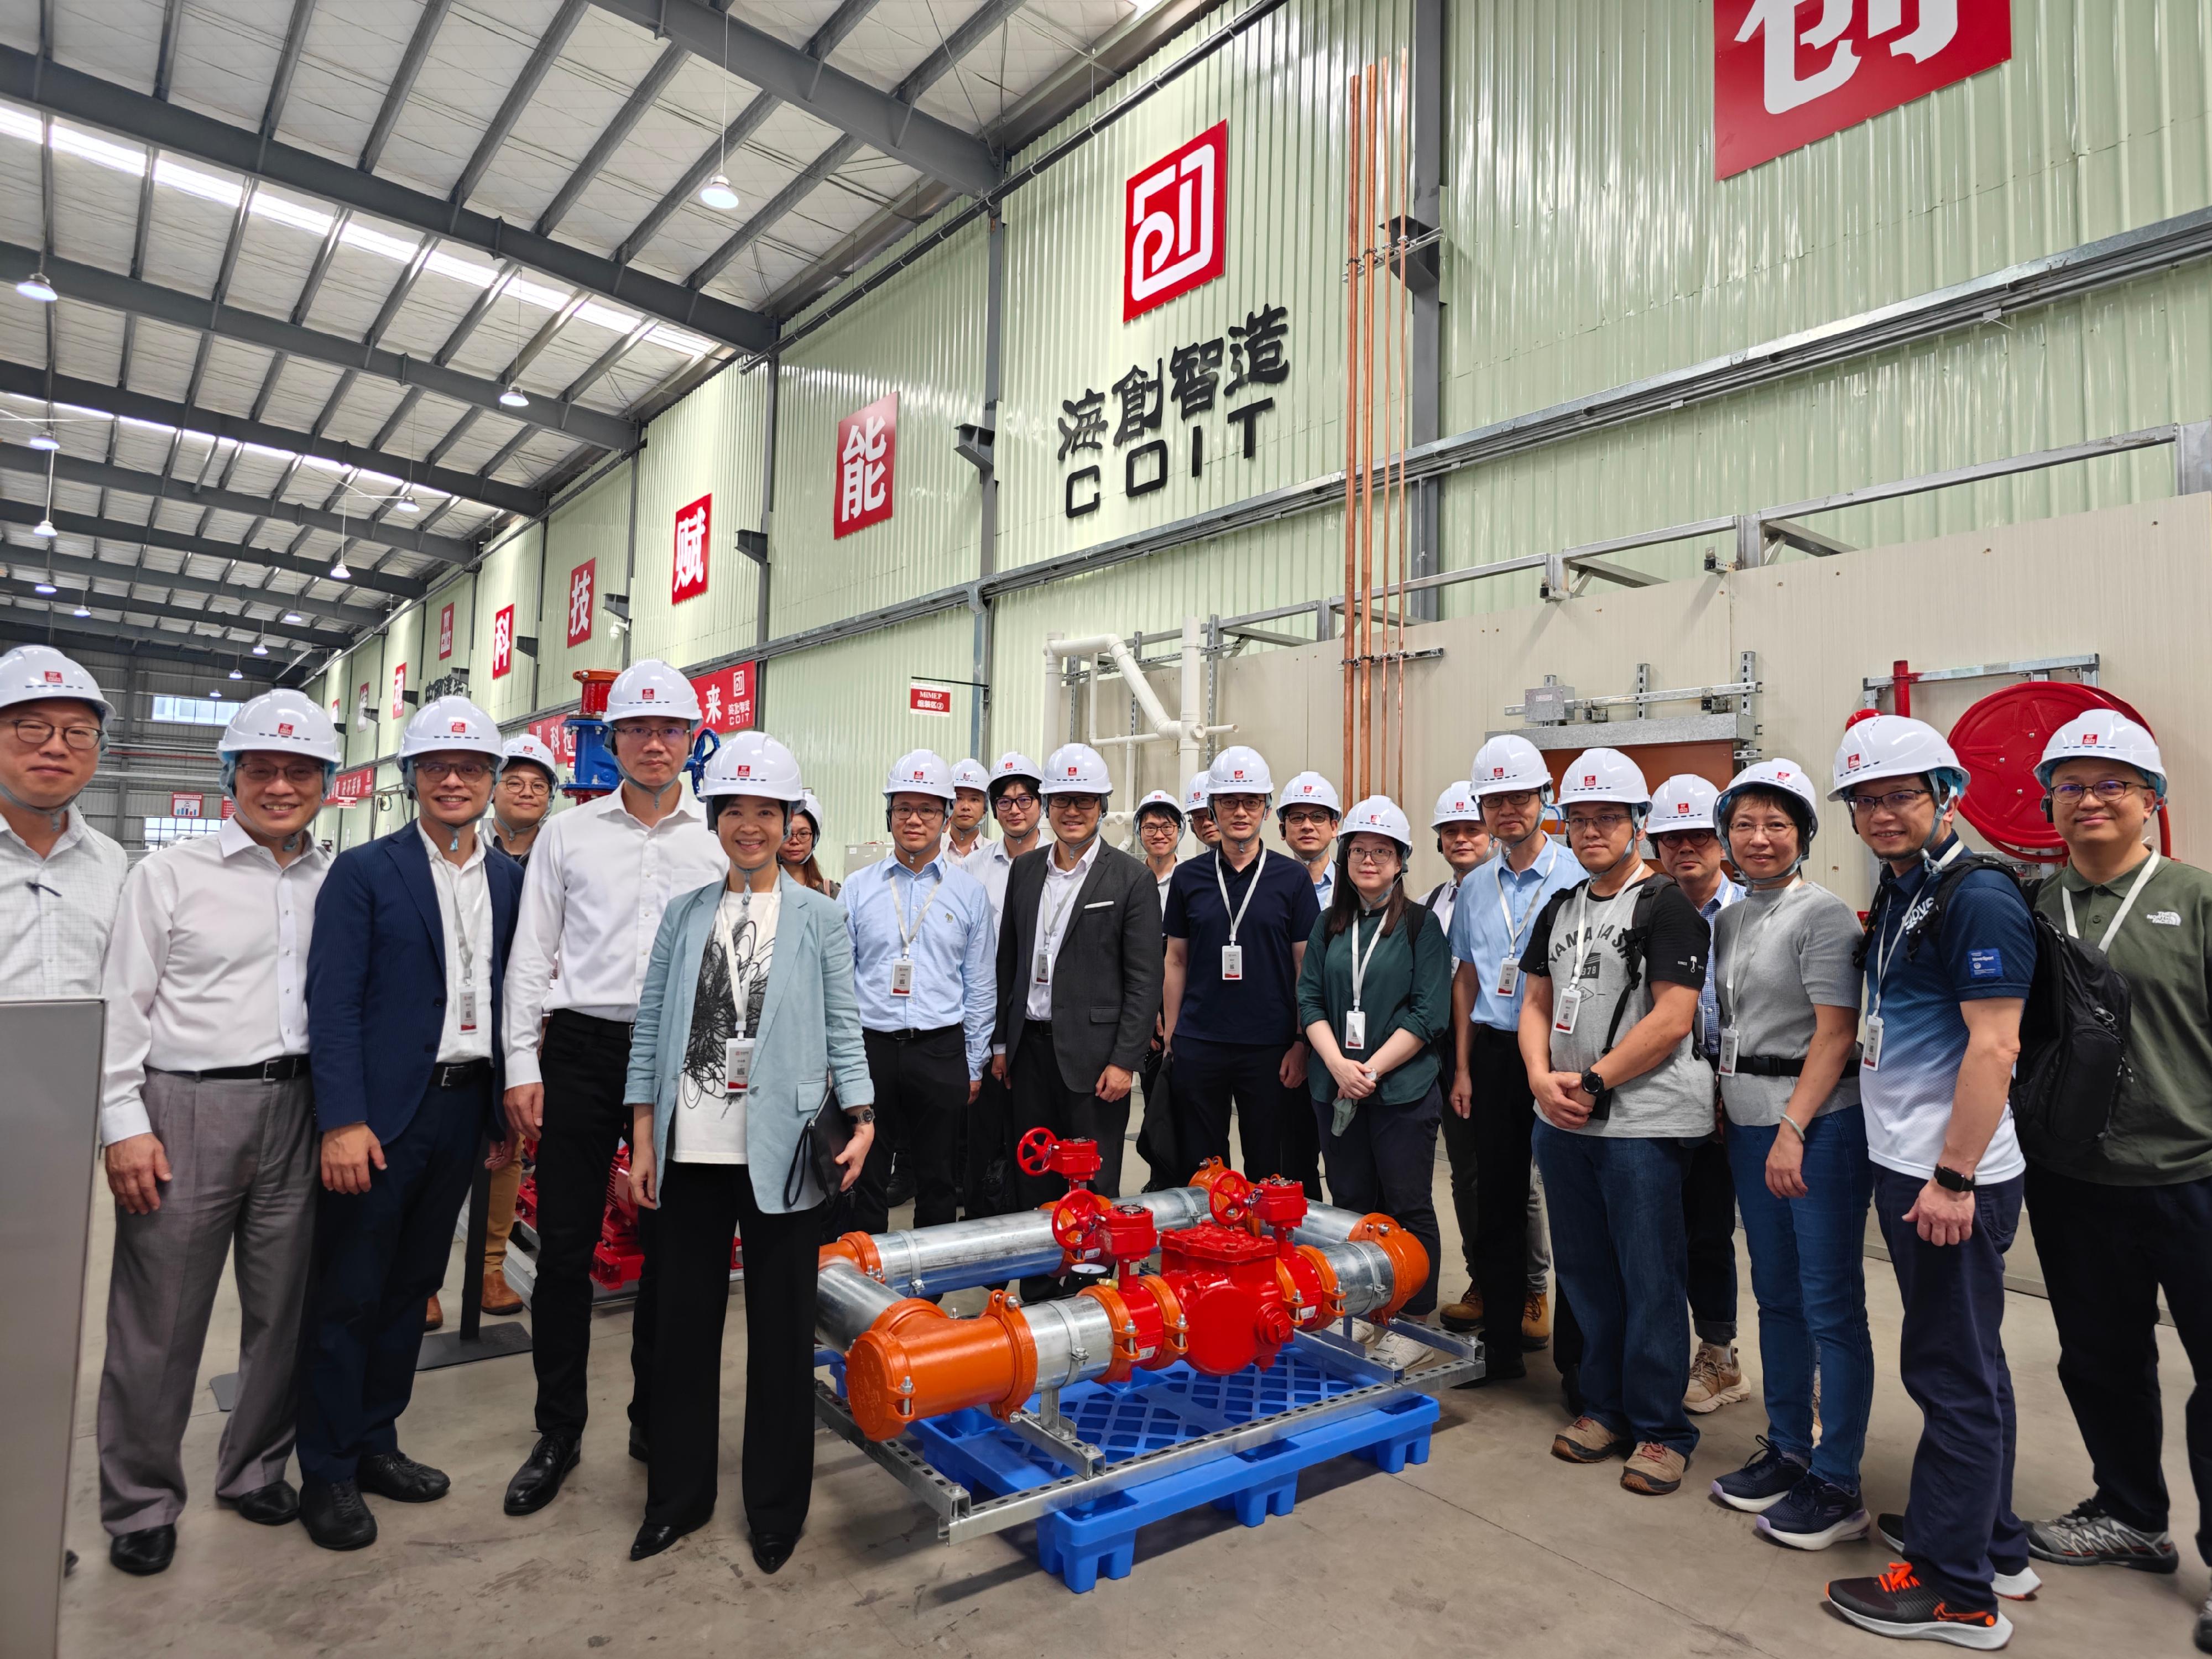 The Secretary for Housing, Ms Winnie Ho, and representatives of the Housing Department visited Zhuhai today (September 19) to get an understanding of the latest development of Multi-trade Integrated Mechanical, Electrical and Plumbing (MiMEP) in the Guangdong-Hong Kong-Macao Greater Bay Area, as well as the application of this innovative and efficient construction technology in Hong Kong's public housing projects. Photo shows Ms Ho (fifth left) visiting the digital pavilion and production lines of the China Overseas Innovation & Technology (Zhuhai) Company Limited.